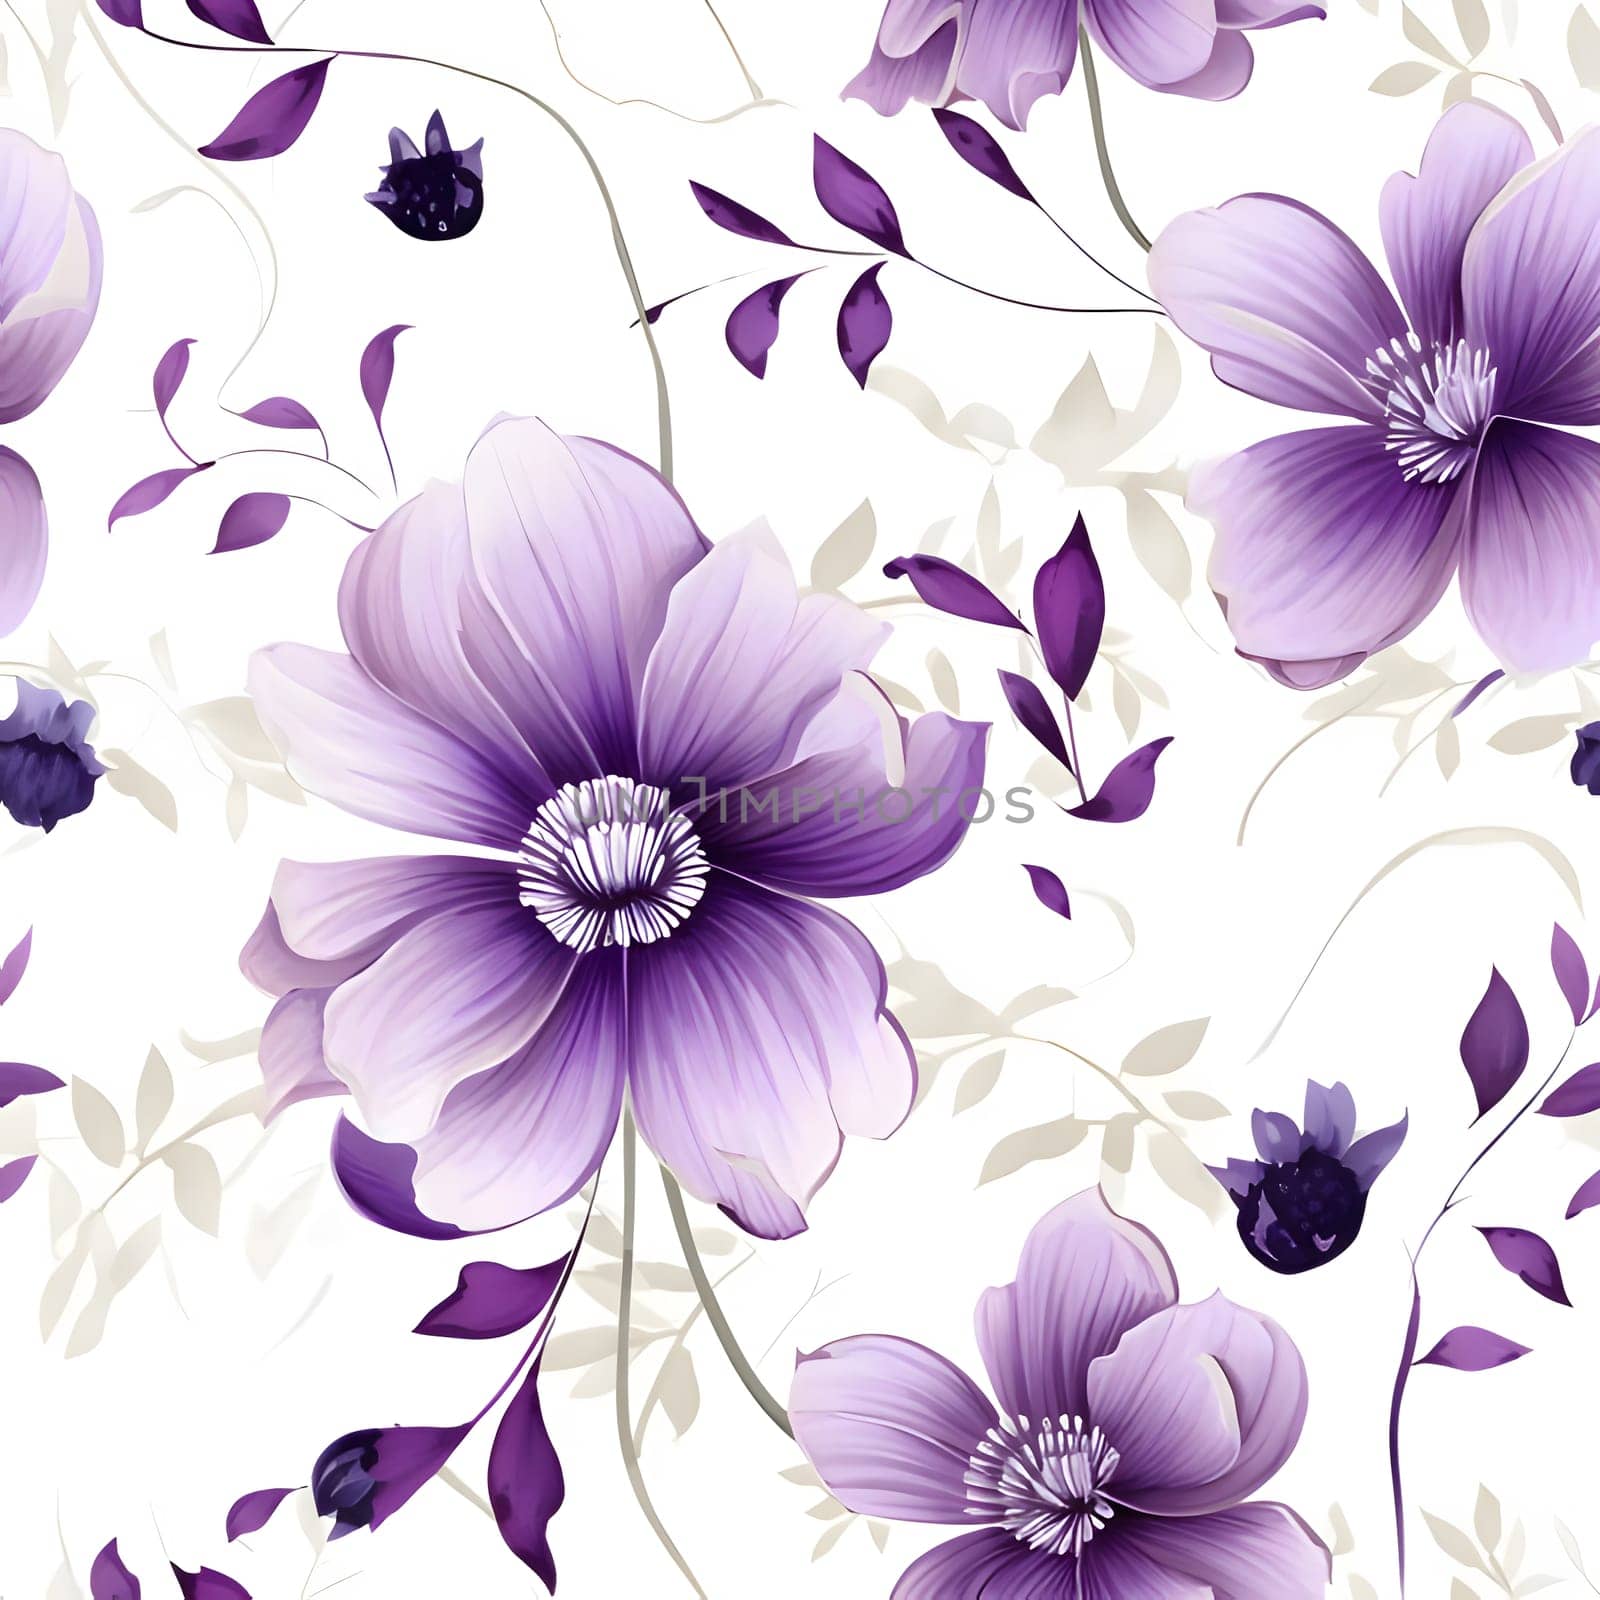 Patterns and banners backgrounds: Seamless floral pattern with purple poppies. Vector illustration.